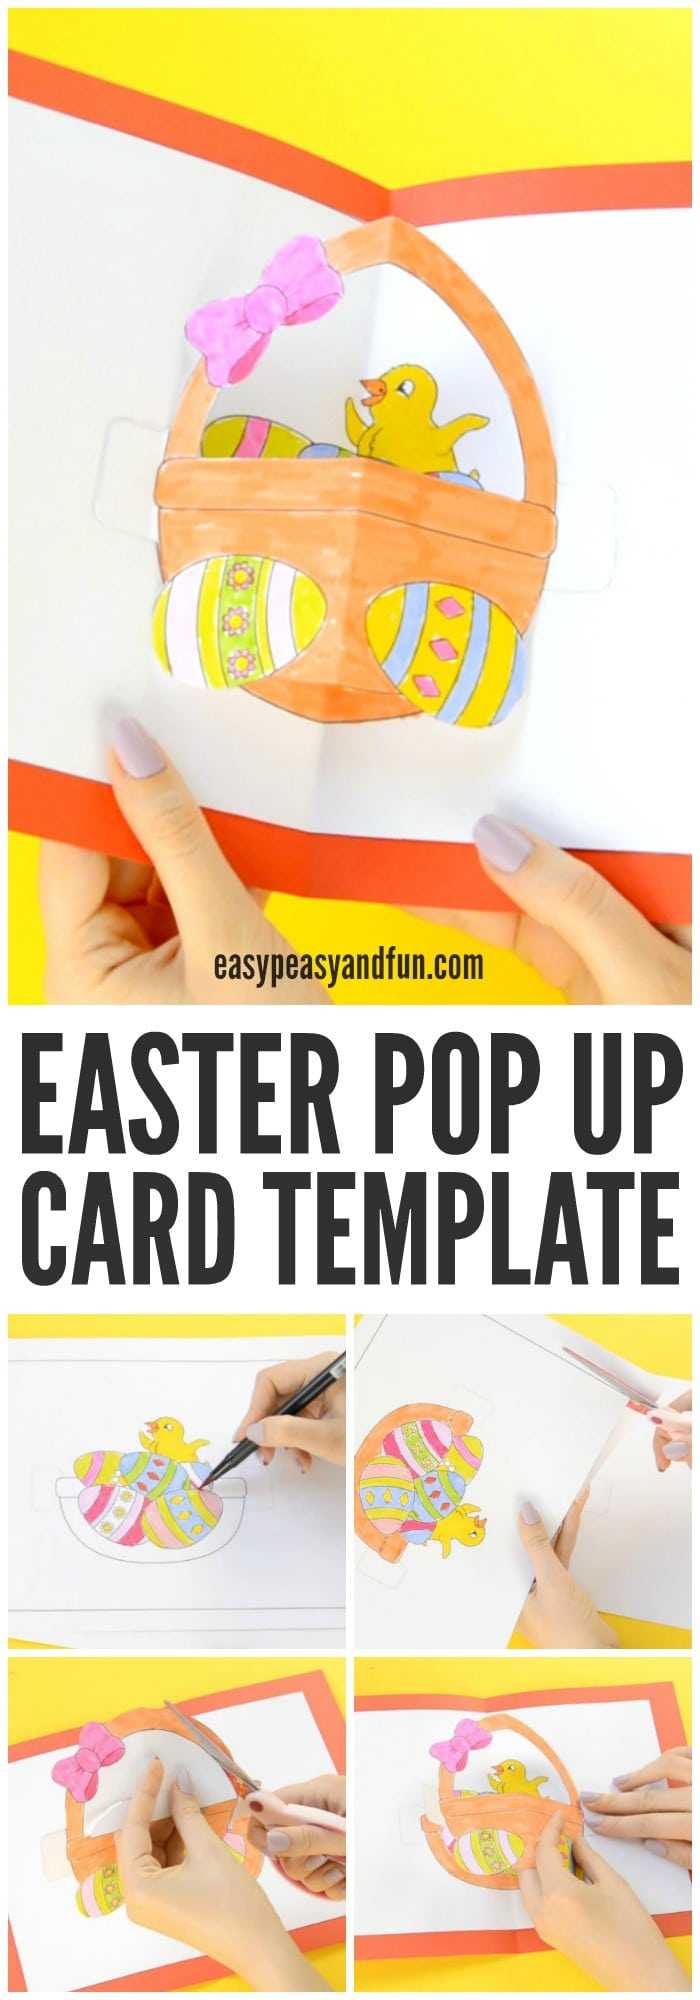 Pop Up Easter Card Template Ks2 – Hd Easter Images With For Easter Card Template Ks2